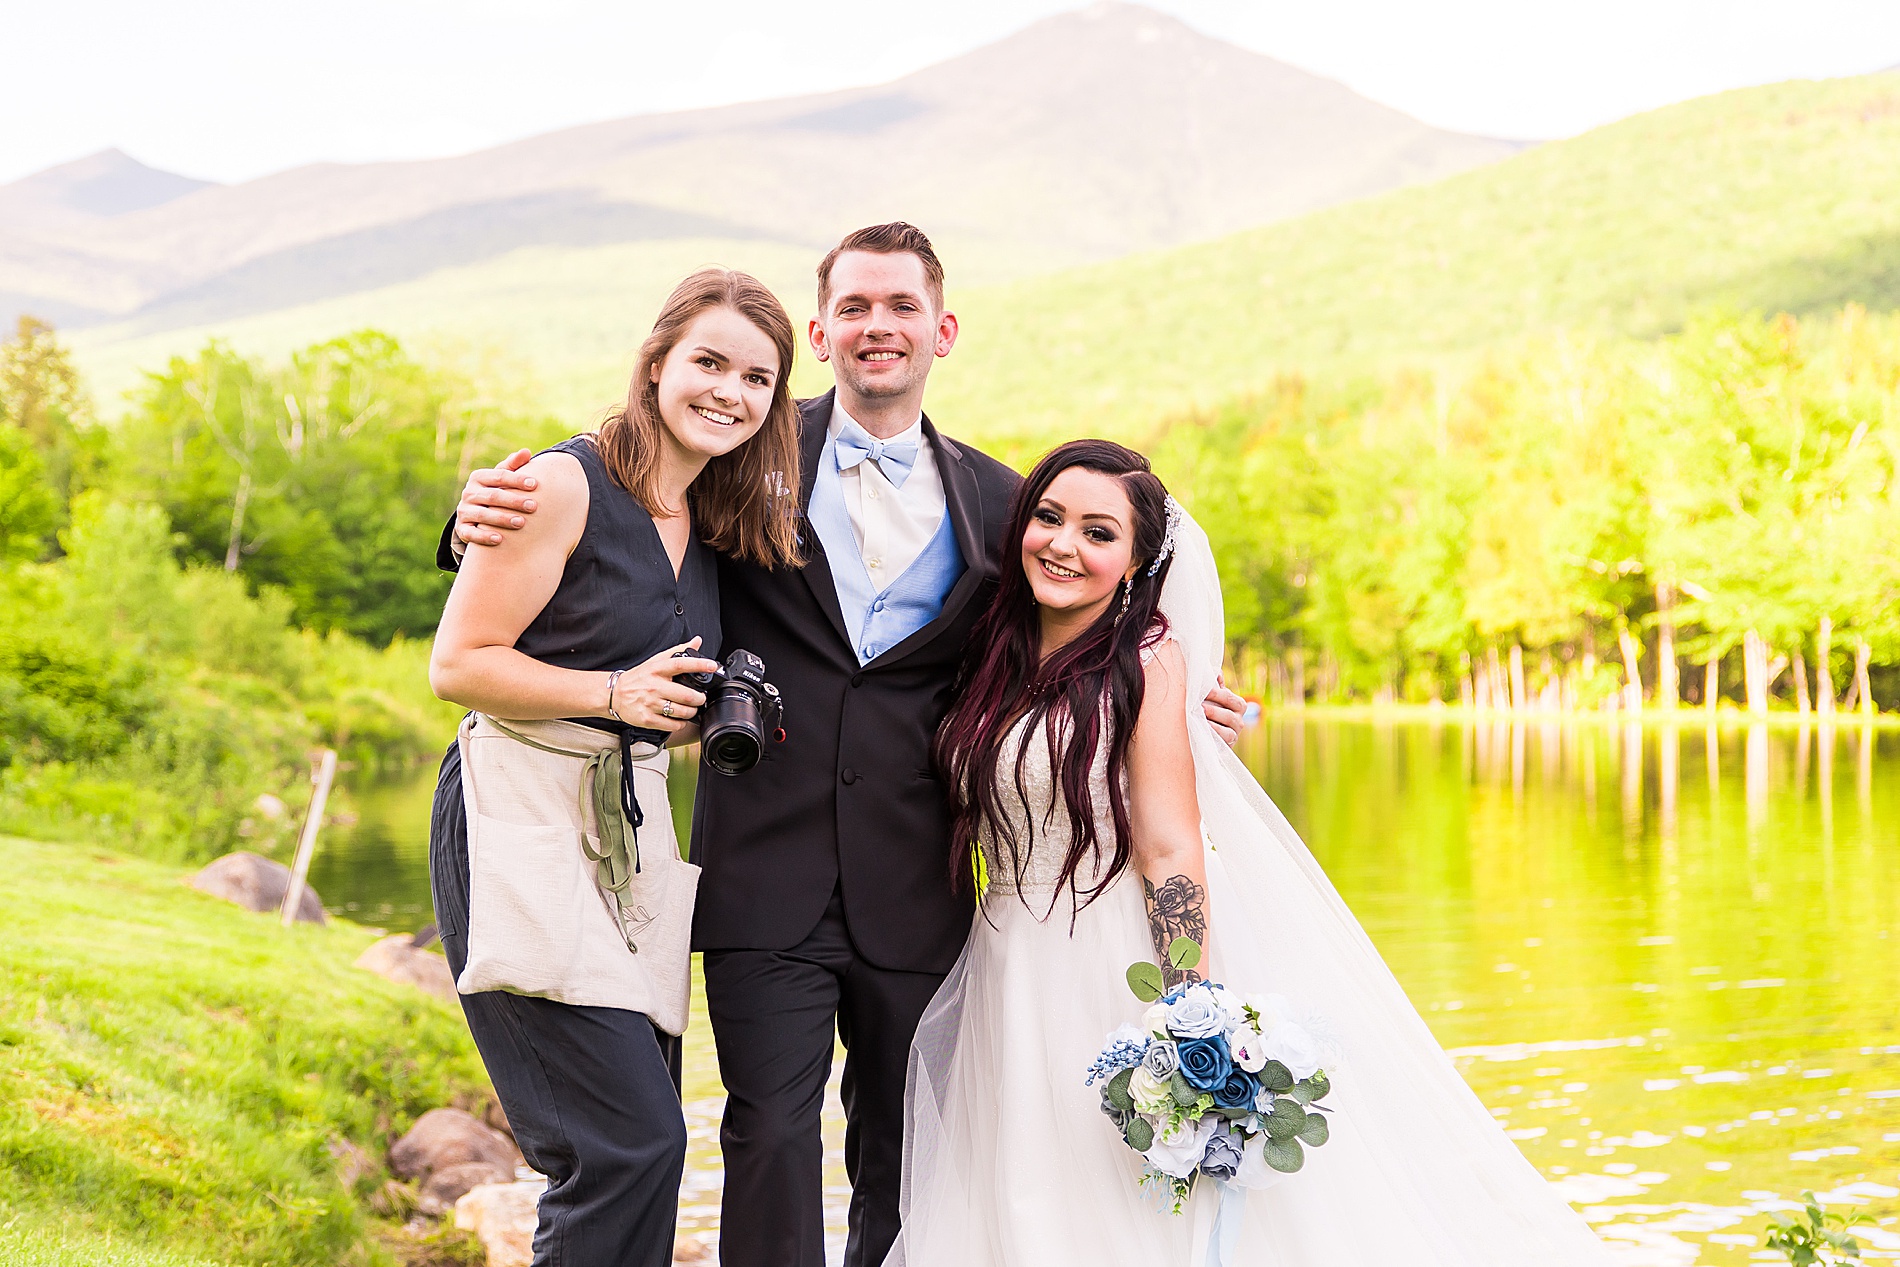 NH Wedding Photographer Allison Clarke with bride and groom at Head Resort Wedding in Lincoln NH 